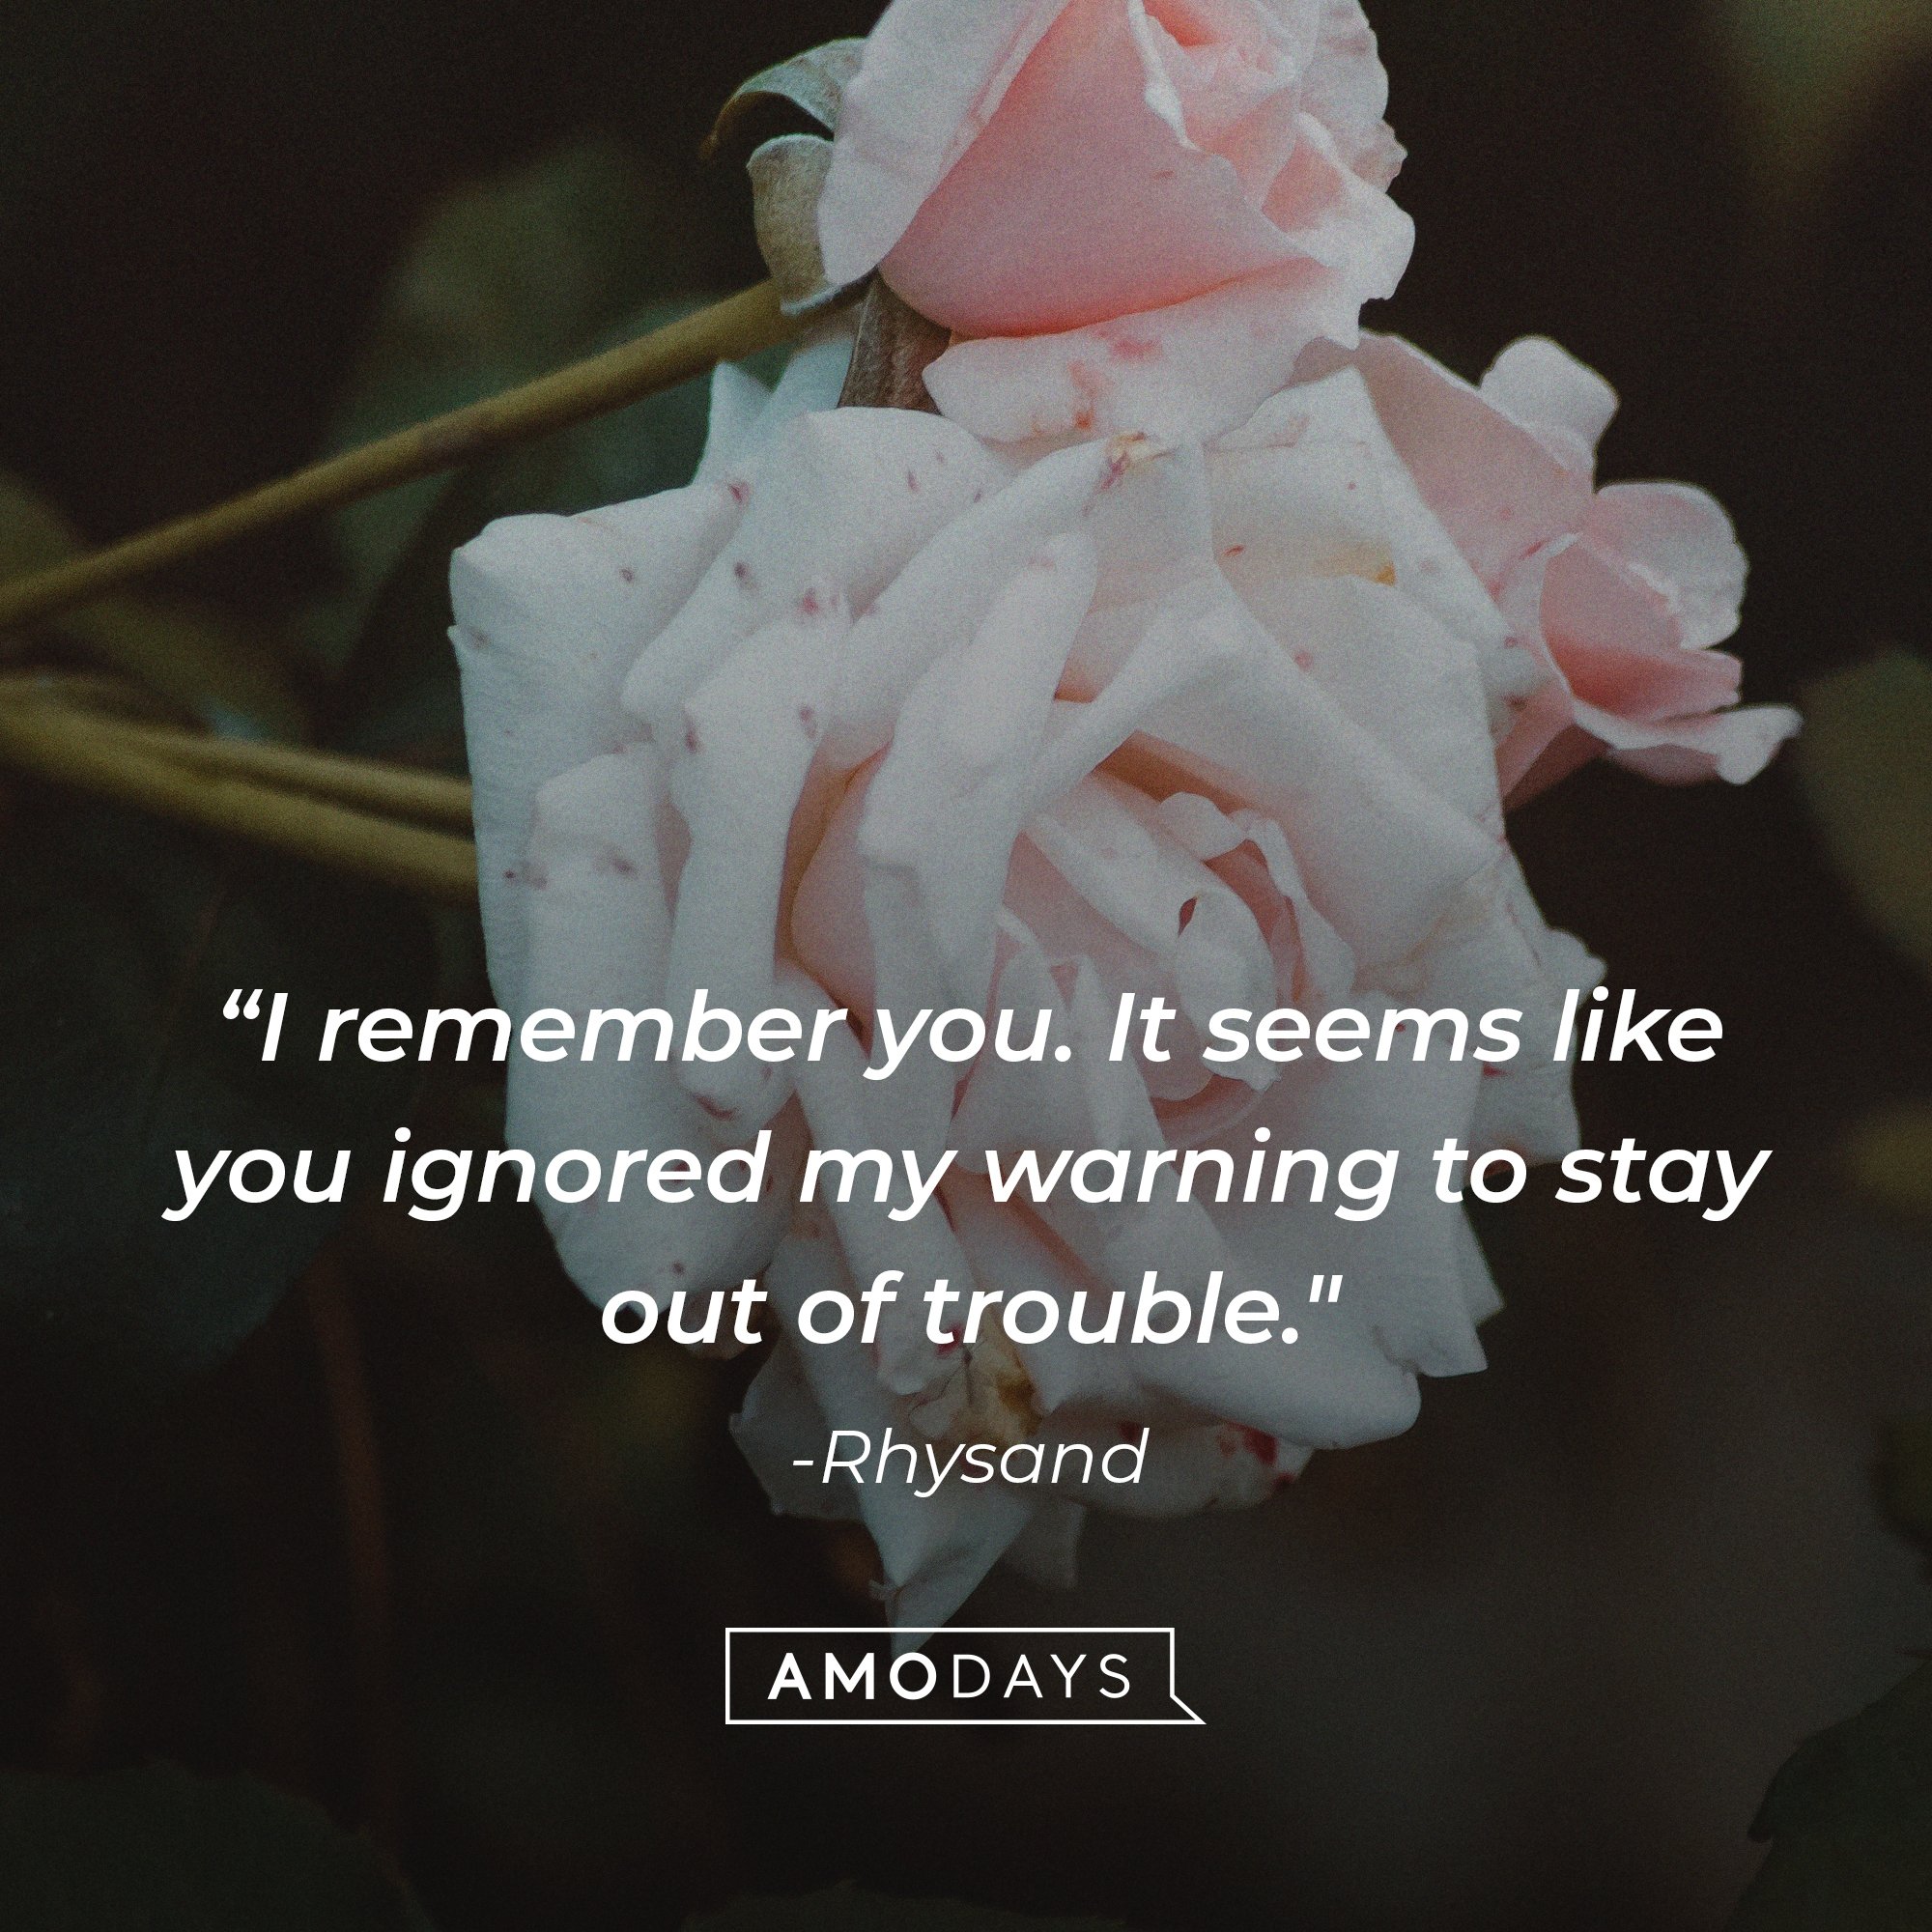 Rhysand’s quote: "I remember you. It seems like you ignored my warning to stay out of trouble."  |  Image: AmoDays